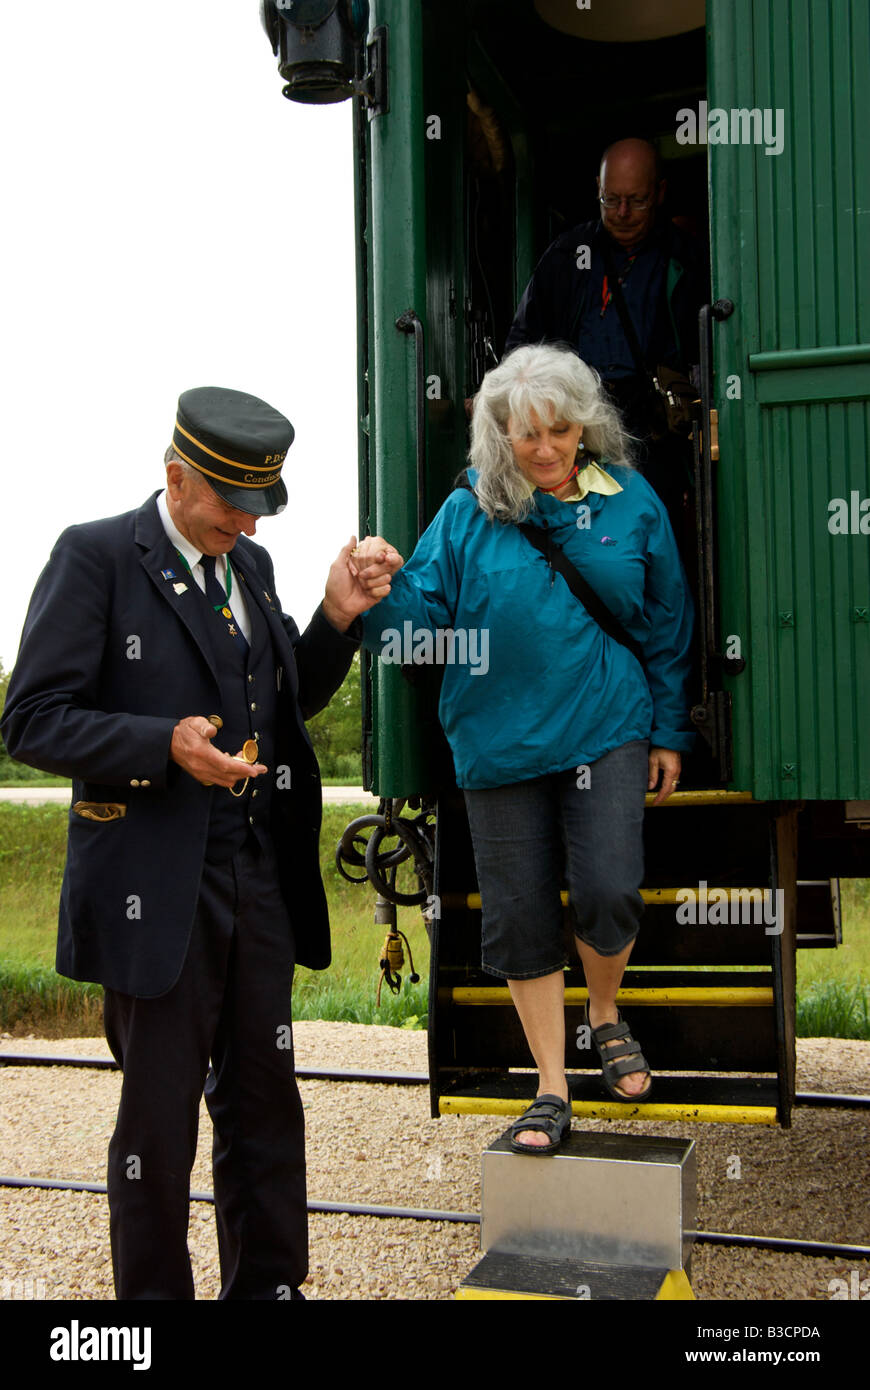 Prairie Dog Central antique railway volunteer conductor in period uniform helping a passenger debark from a wooden railway coach Stock Photo